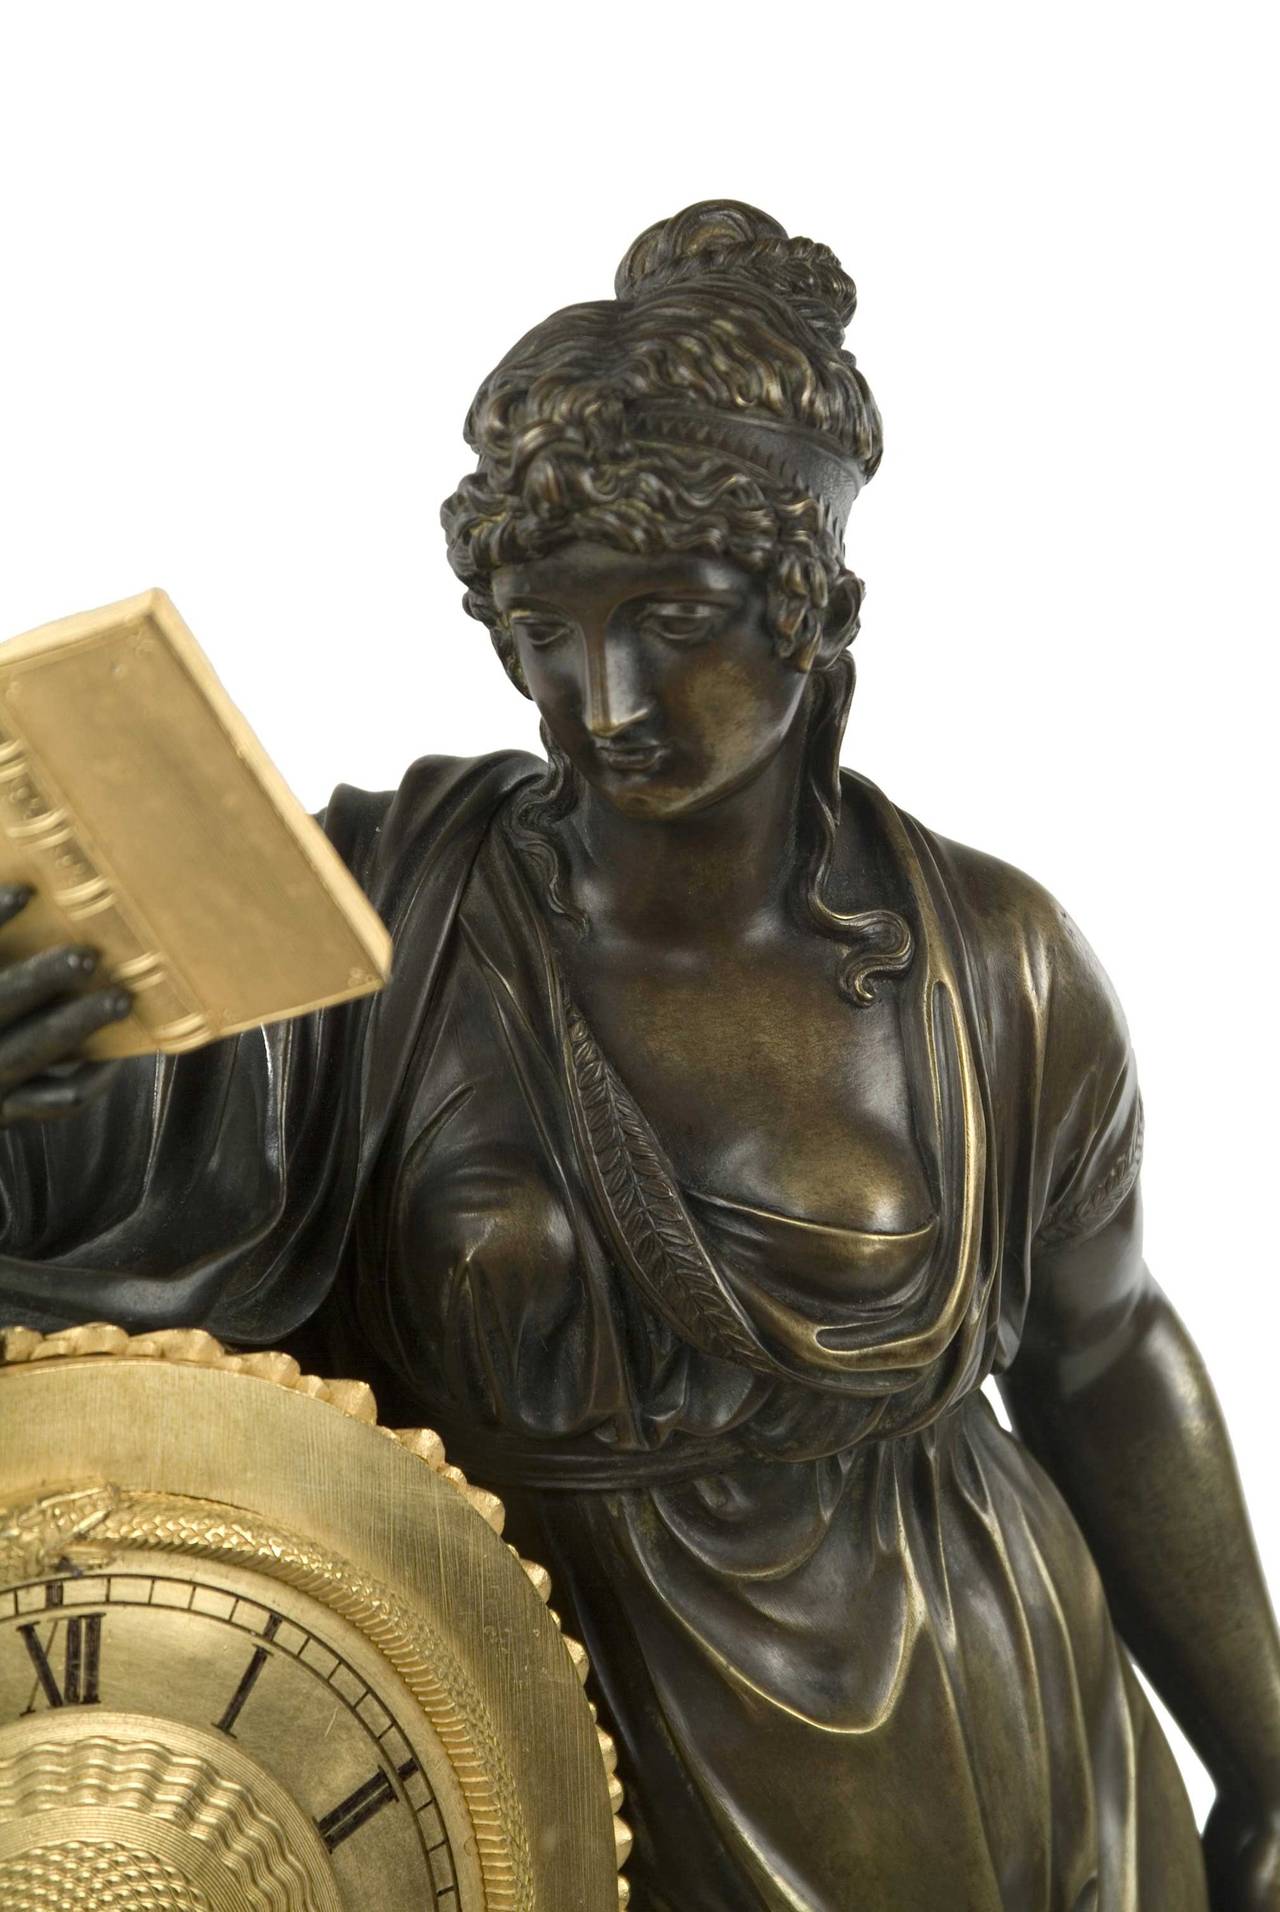 Period French Empire gilt and patinated bronze clock with a figure representing Clio, the Greek Muse of History and Writing. Clio was responsible for transmitting her wisdom of history into the minds of the human race. The main subject of the clock